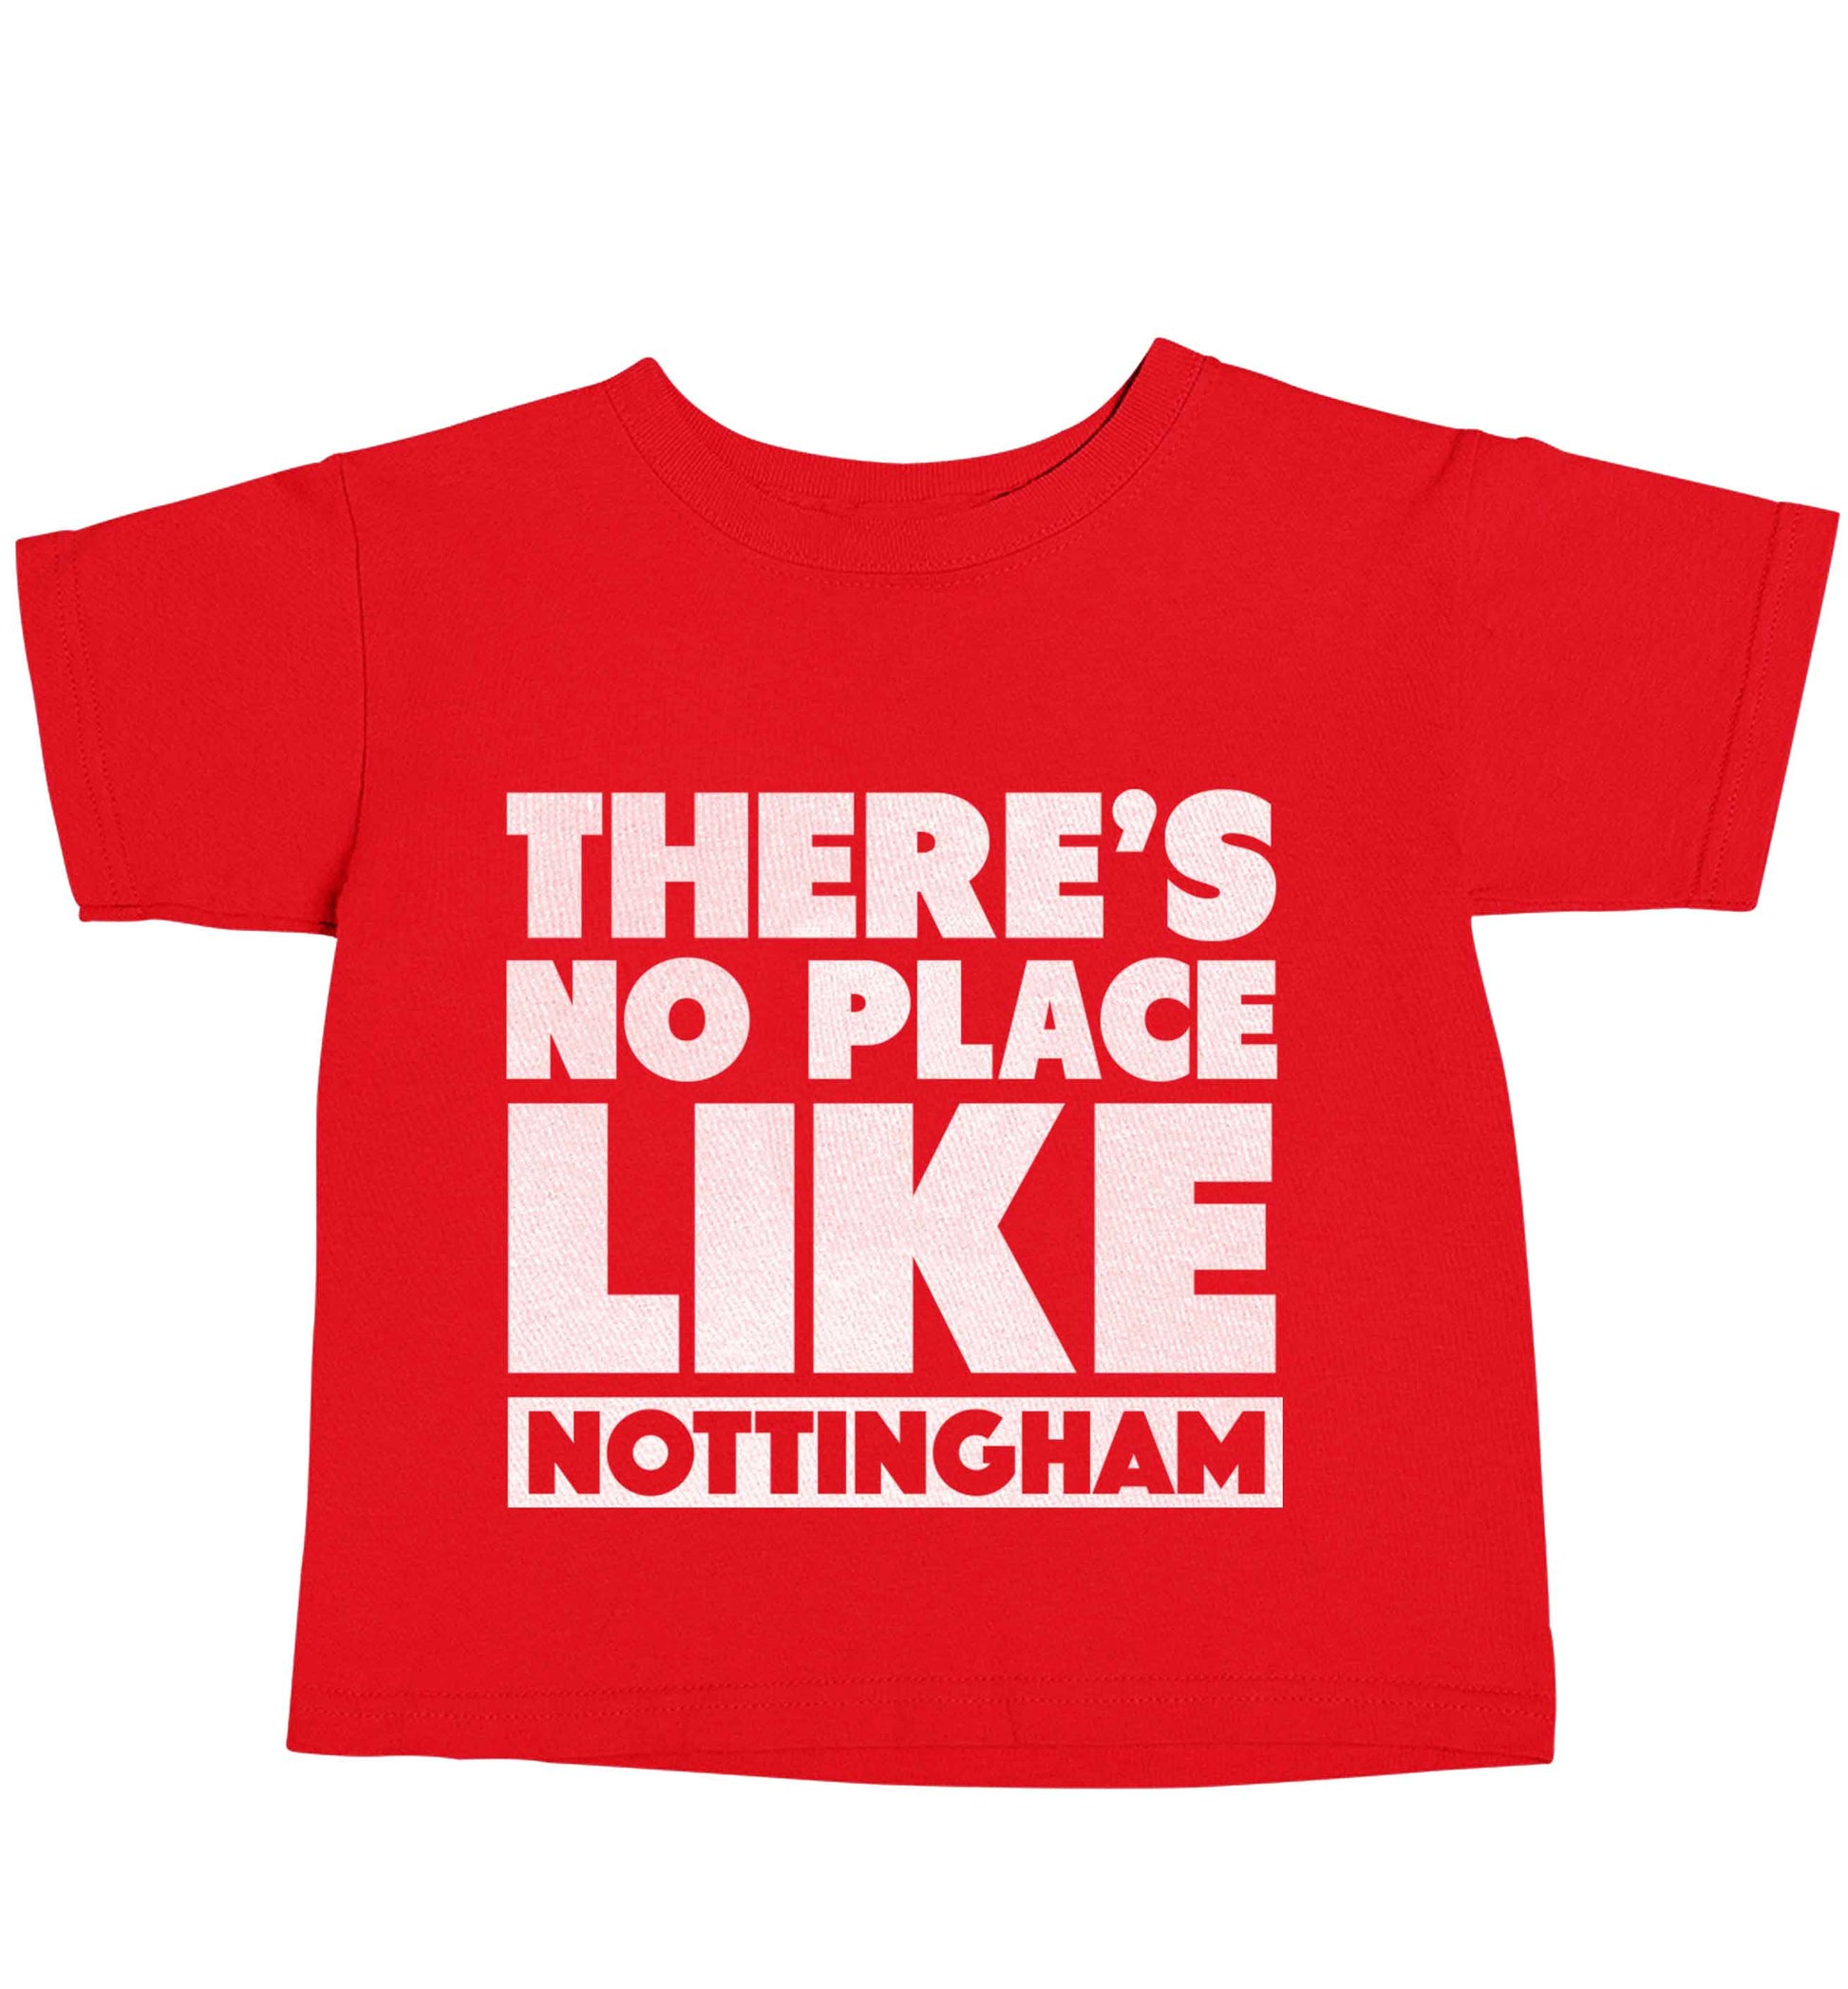 There's no place like Nottingham red baby toddler Tshirt 2 Years